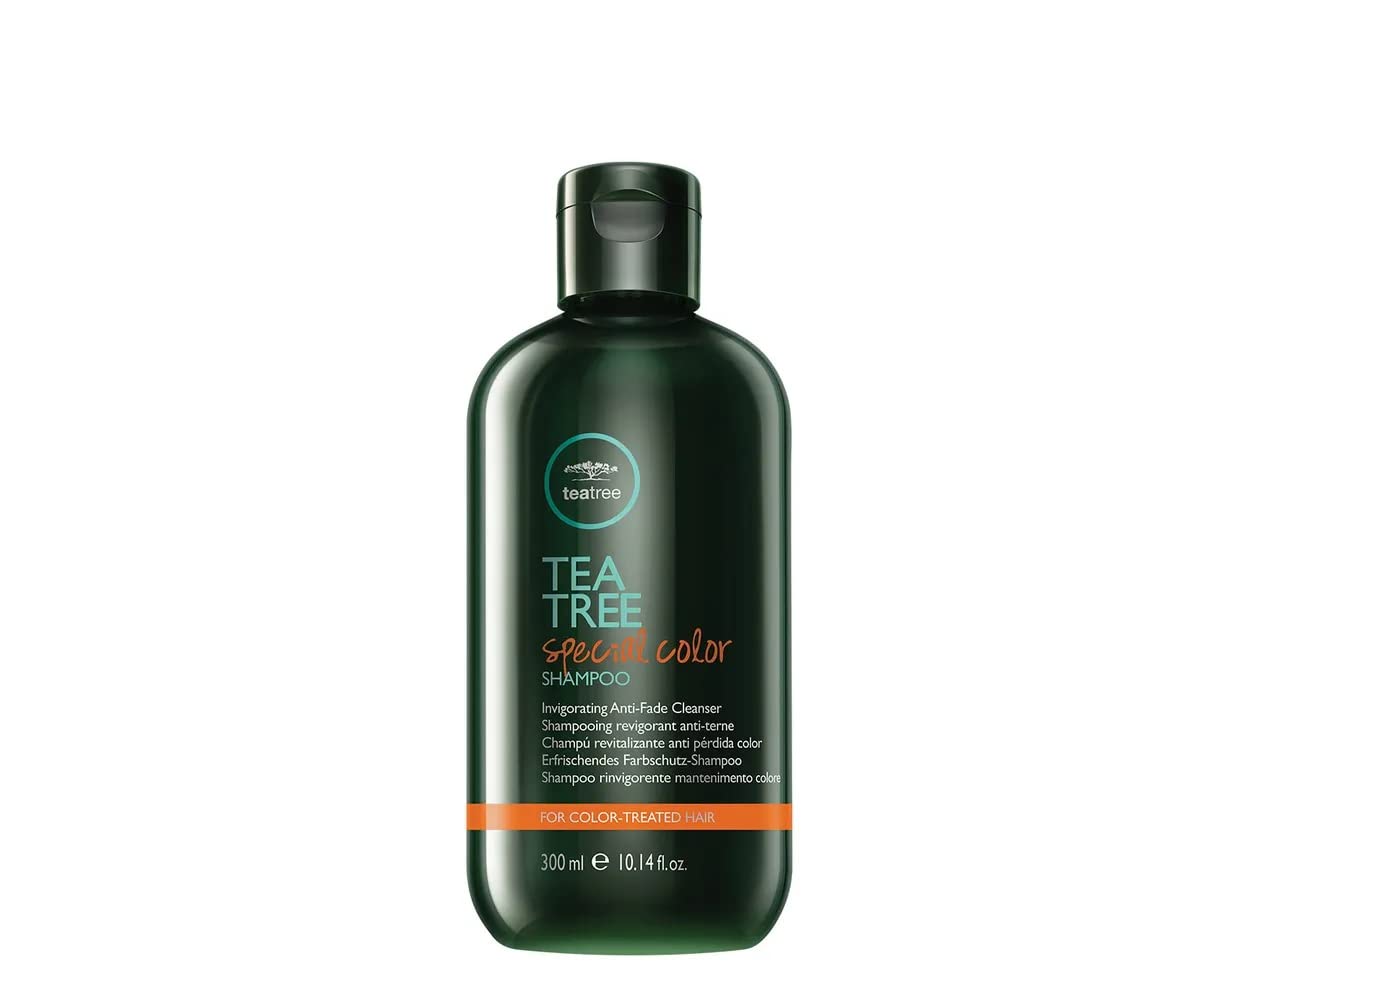 Tea Tree Special Color Shampoo, Gently Cleanses, [...]